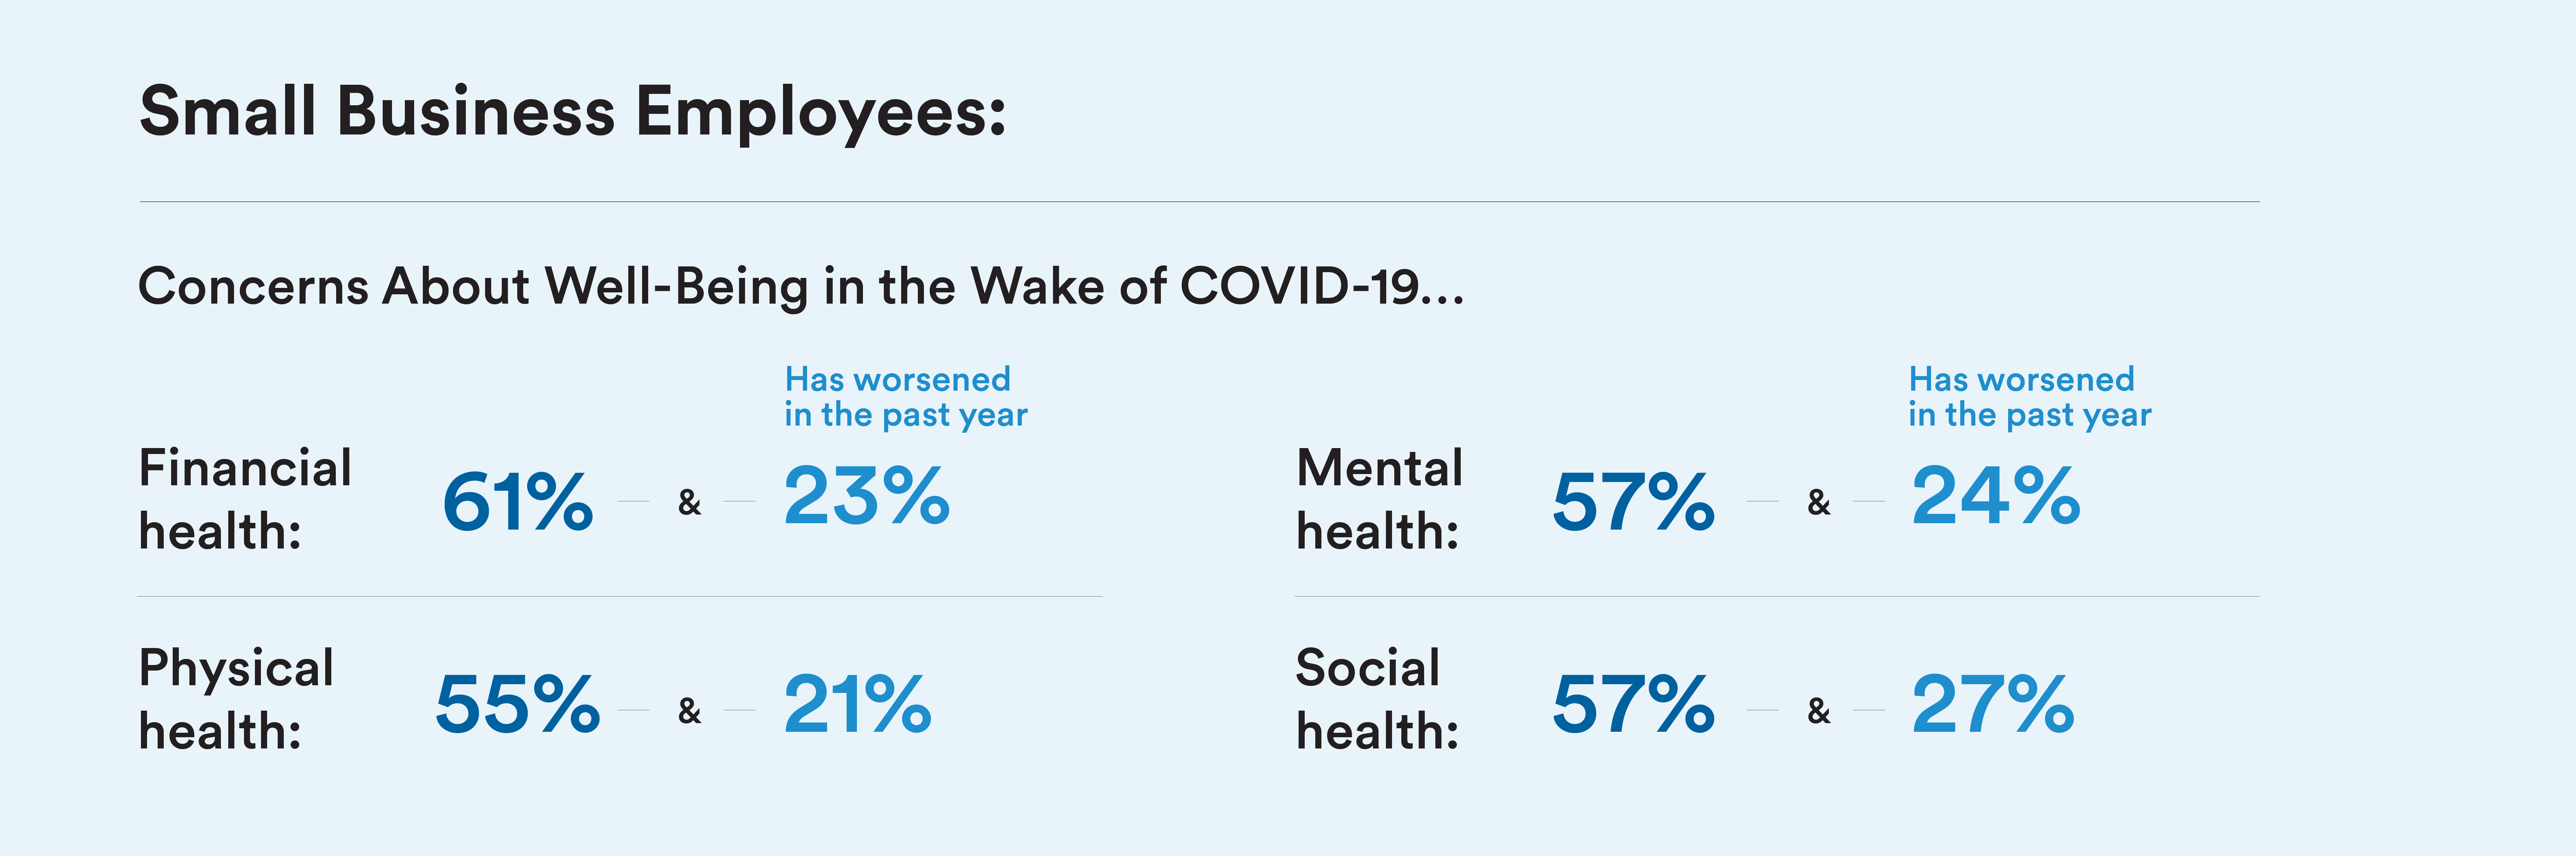 Concren about Well-Being in the wake of COVID-19